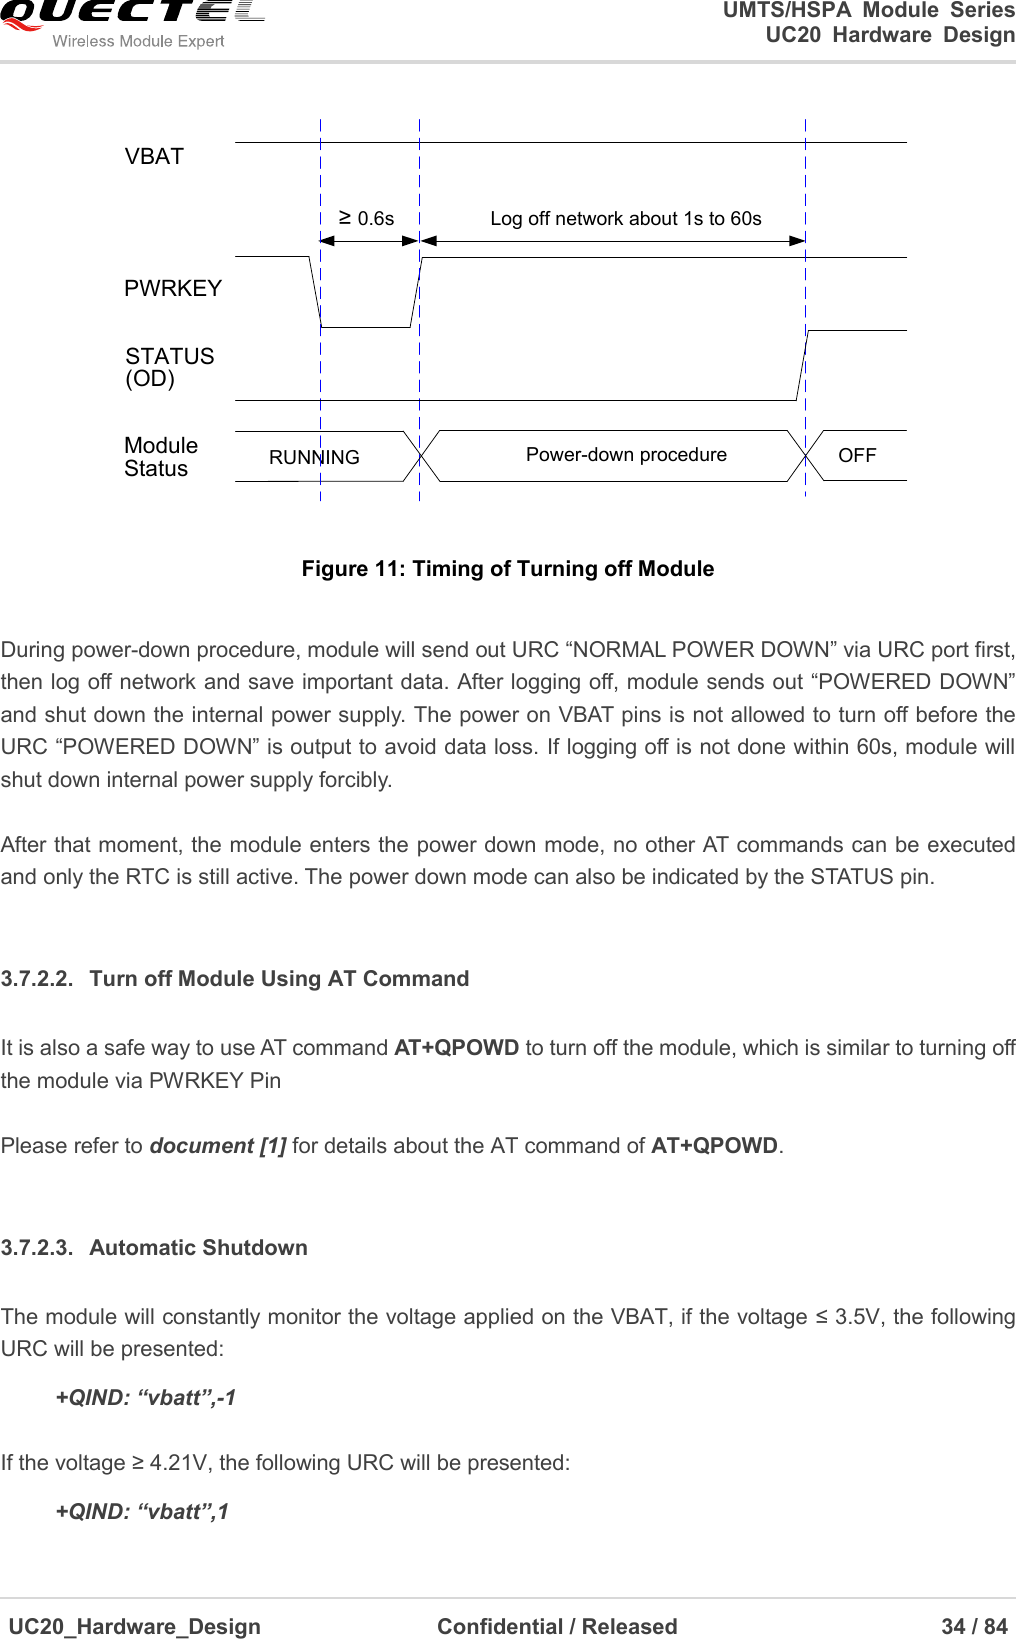                                                                                                                                               UMTS/HSPA  Module  Series                                                                 UC20  Hardware  Design  UC20_Hardware_Design                  Confidential / Released                            34 / 84     VBATPWRKEYLog off network about 1s to 60s≥ 0.6sRUNNING Power-down procedure OFFModuleStatusSTATUS(OD) Figure 11: Timing of Turning off Module  During power-down procedure, module will send out URC “NORMAL POWER DOWN” via URC port first, then log off network and save important data. After logging off, module sends out “POWERED DOWN” and shut down the internal power supply. The power on VBAT pins is not allowed to turn off before the URC “POWERED DOWN” is output to avoid data loss. If logging off is not done within 60s, module will shut down internal power supply forcibly.  After that moment, the module enters the power down mode, no other AT commands can be executed and only the RTC is still active. The power down mode can also be indicated by the STATUS pin.  3.7.2.2.  Turn off Module Using AT Command It is also a safe way to use AT command AT+QPOWD to turn off the module, which is similar to turning off the module via PWRKEY Pin  Please refer to document [1] for details about the AT command of AT+QPOWD.  3.7.2.3.  Automatic Shutdown The module will constantly monitor the voltage applied on the VBAT, if the voltage ≤ 3.5V, the following URC will be presented:     +QIND: “vbatt”,-1  If the voltage ≥ 4.21V, the following URC will be presented:     +QIND: “vbatt”,1 